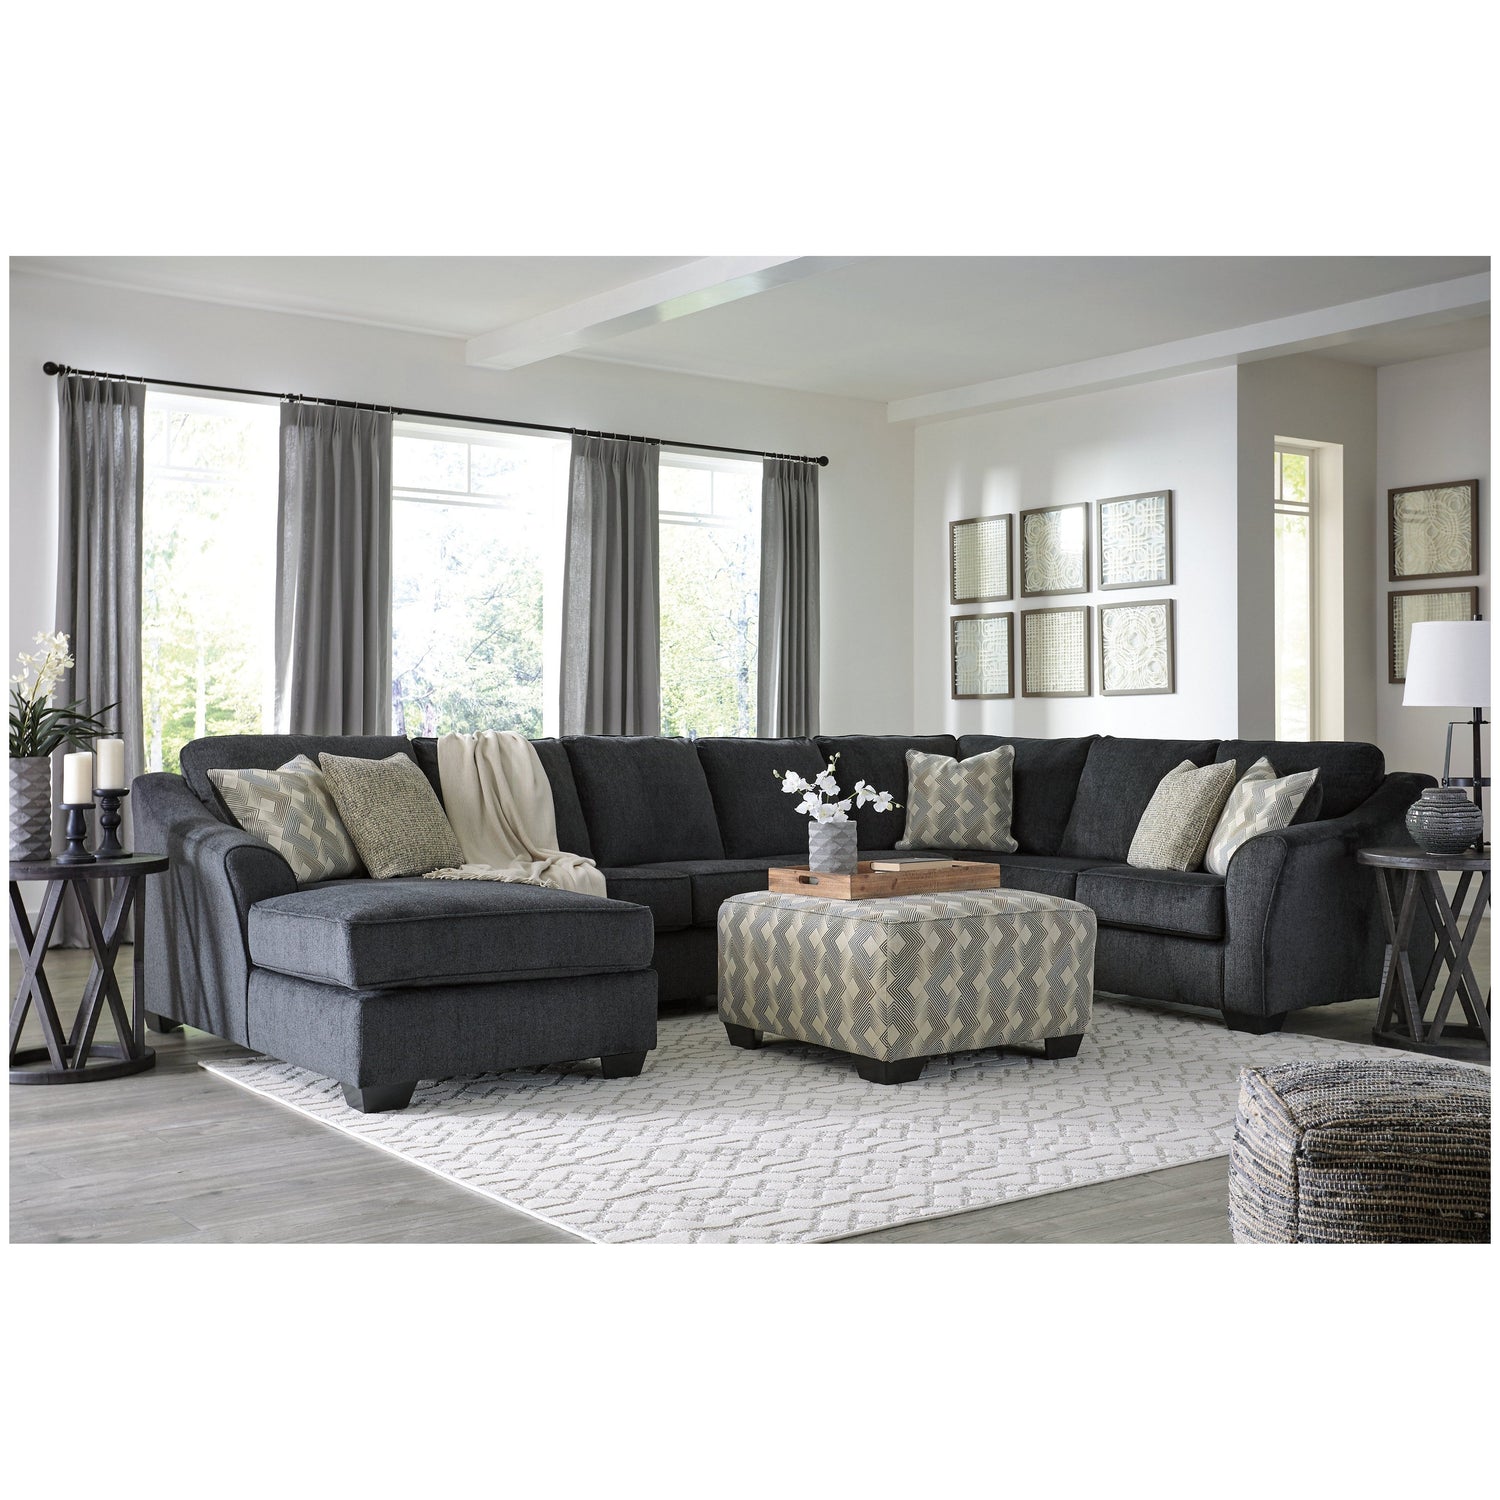 Eltmann 4-Piece Sectional with Chaise Ash-41303S7